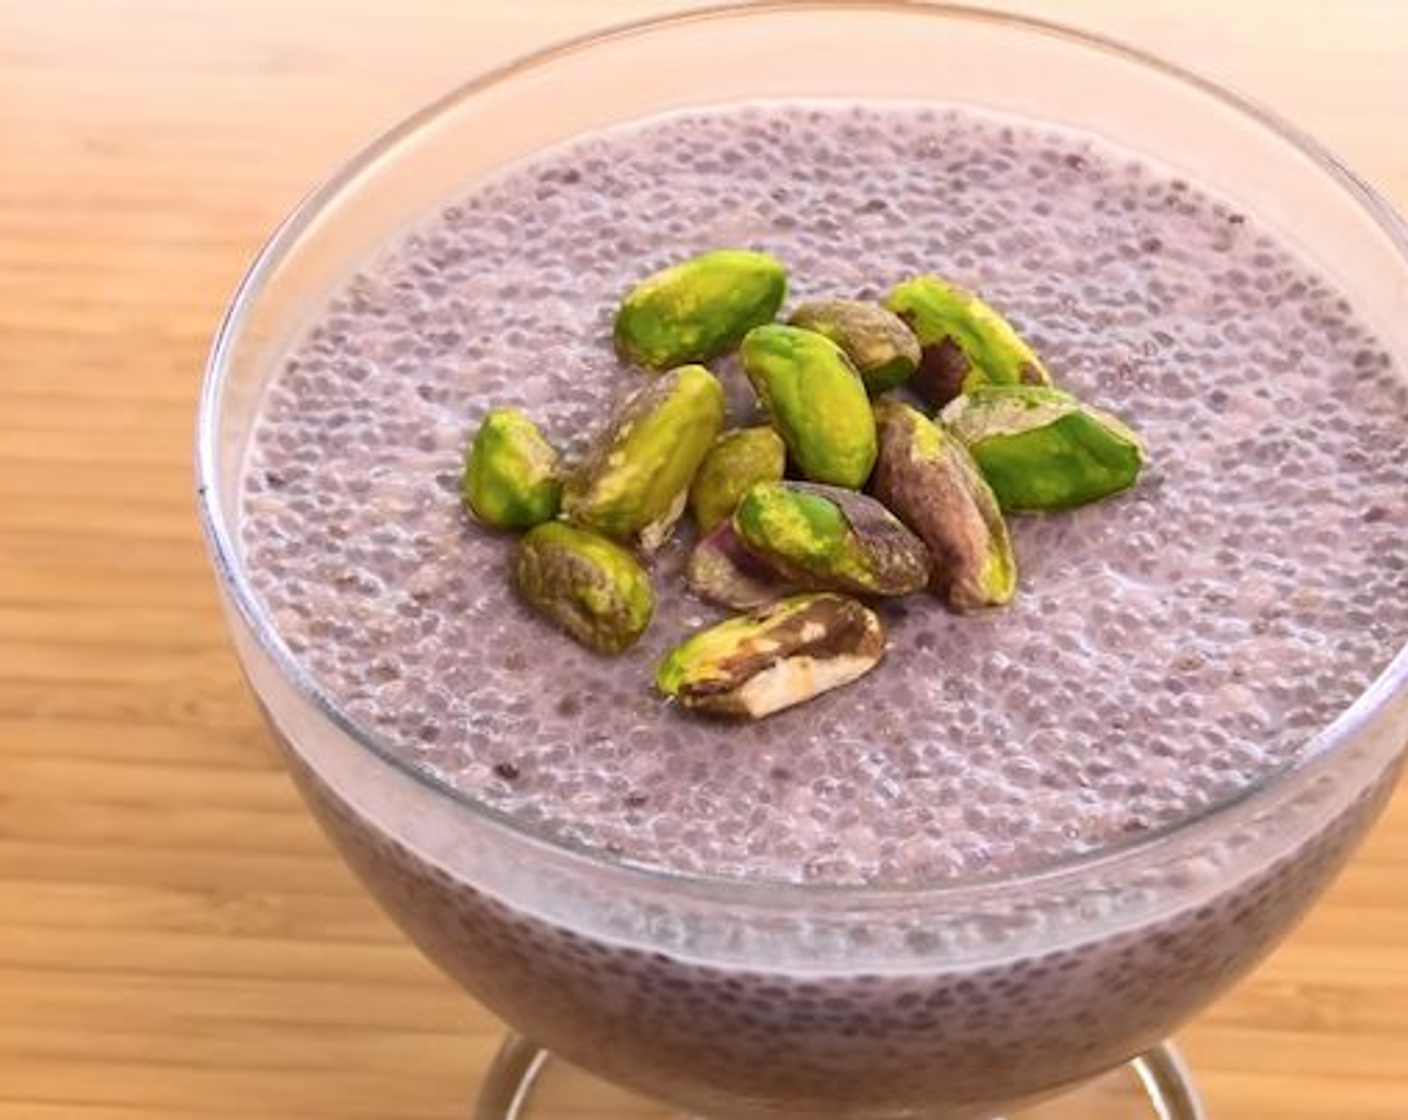 Blueberry Chia Seed Pudding with Pistachios